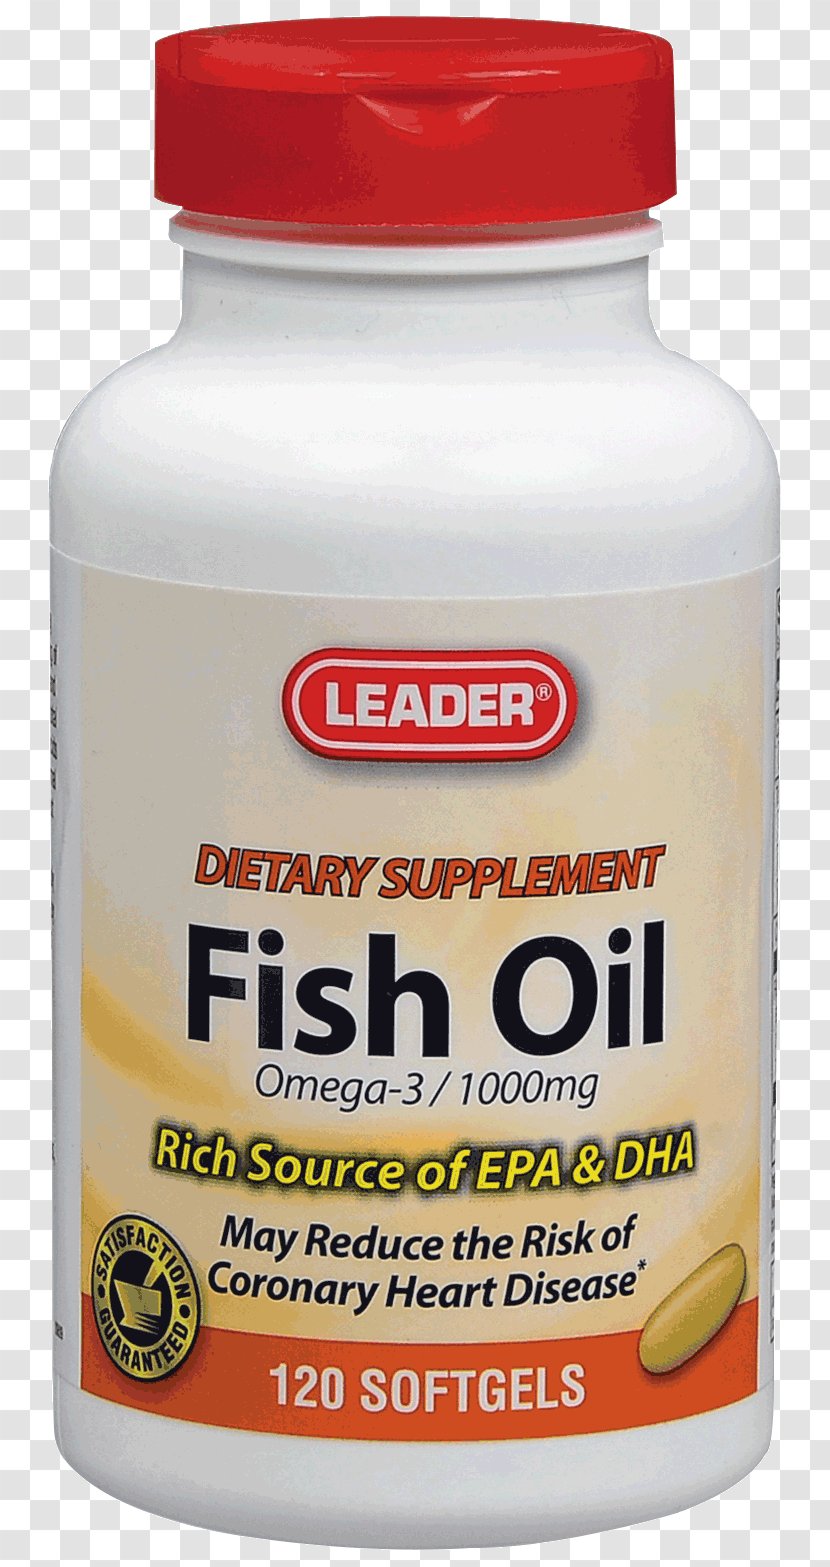 Dietary Supplement Fish Oil Product Vitamin Cardinal Health Transparent PNG